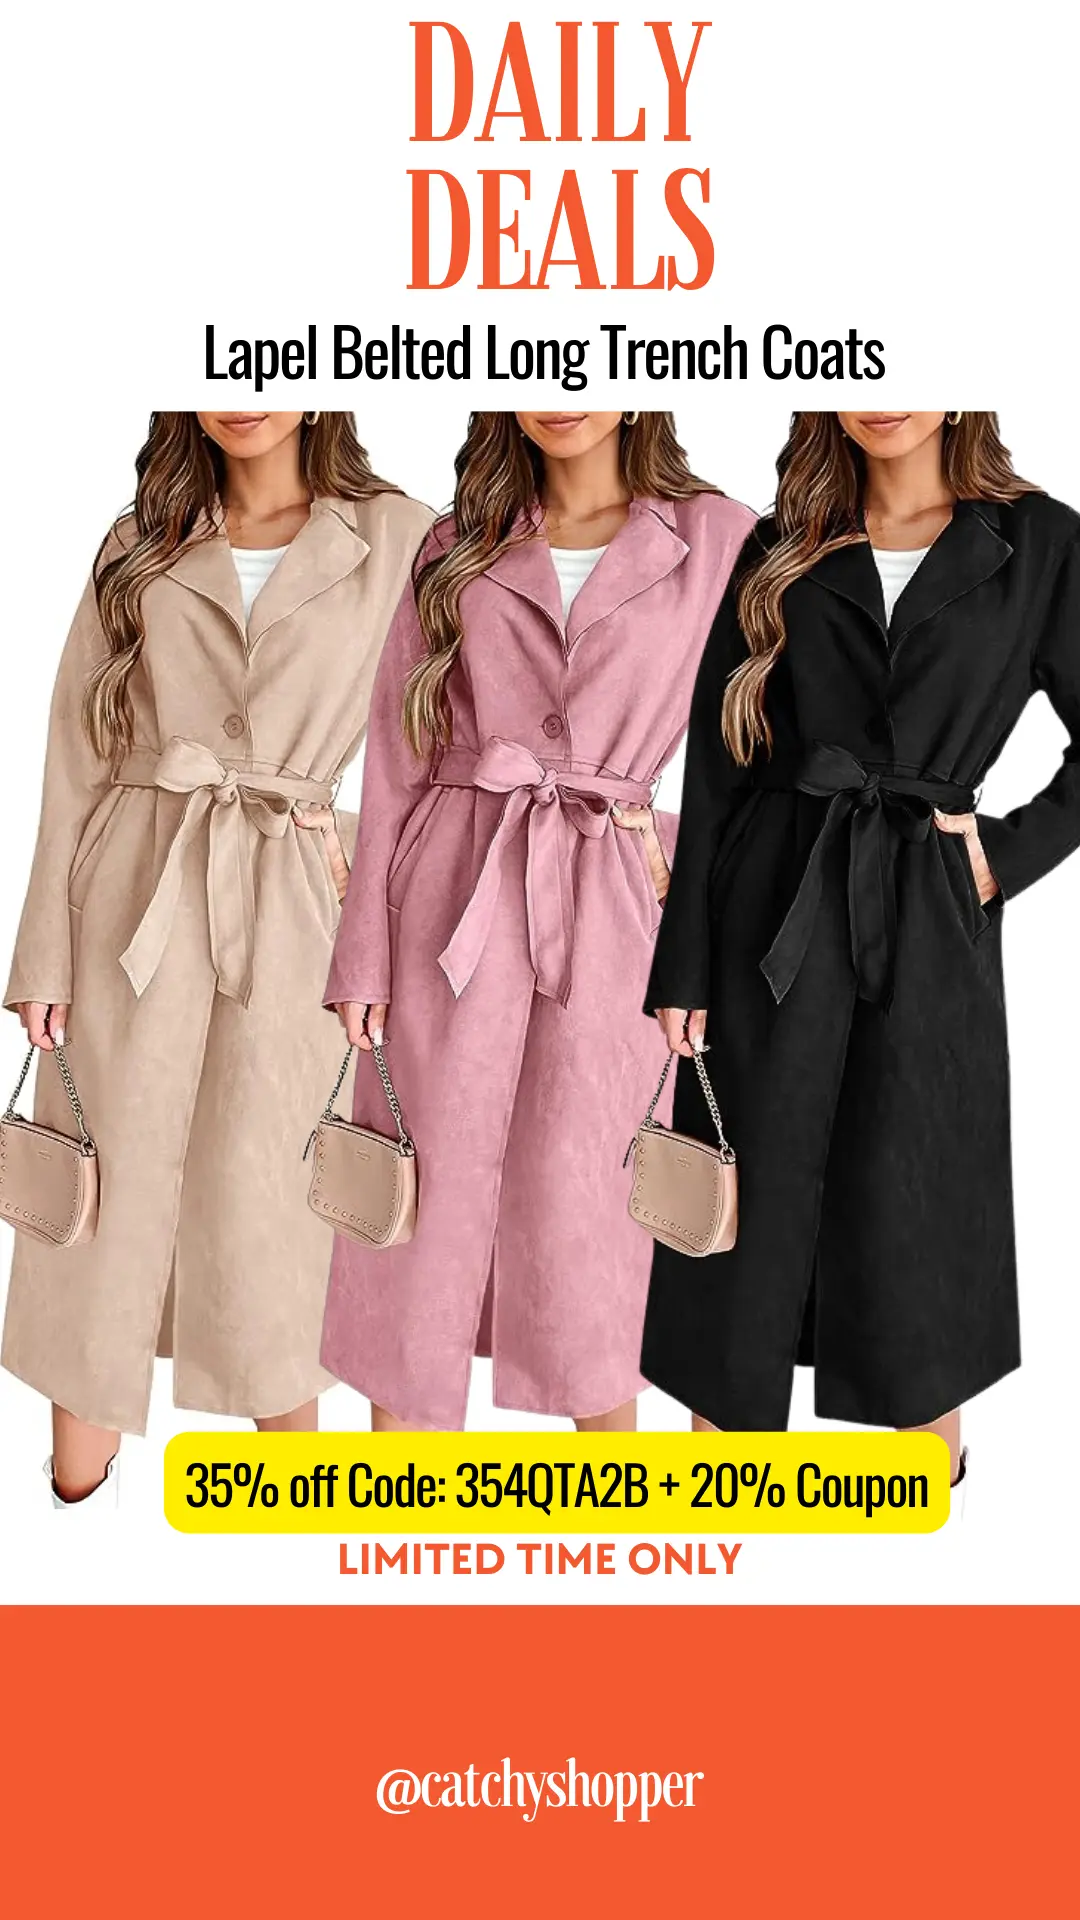 Lapel Belted Long Trench Coats